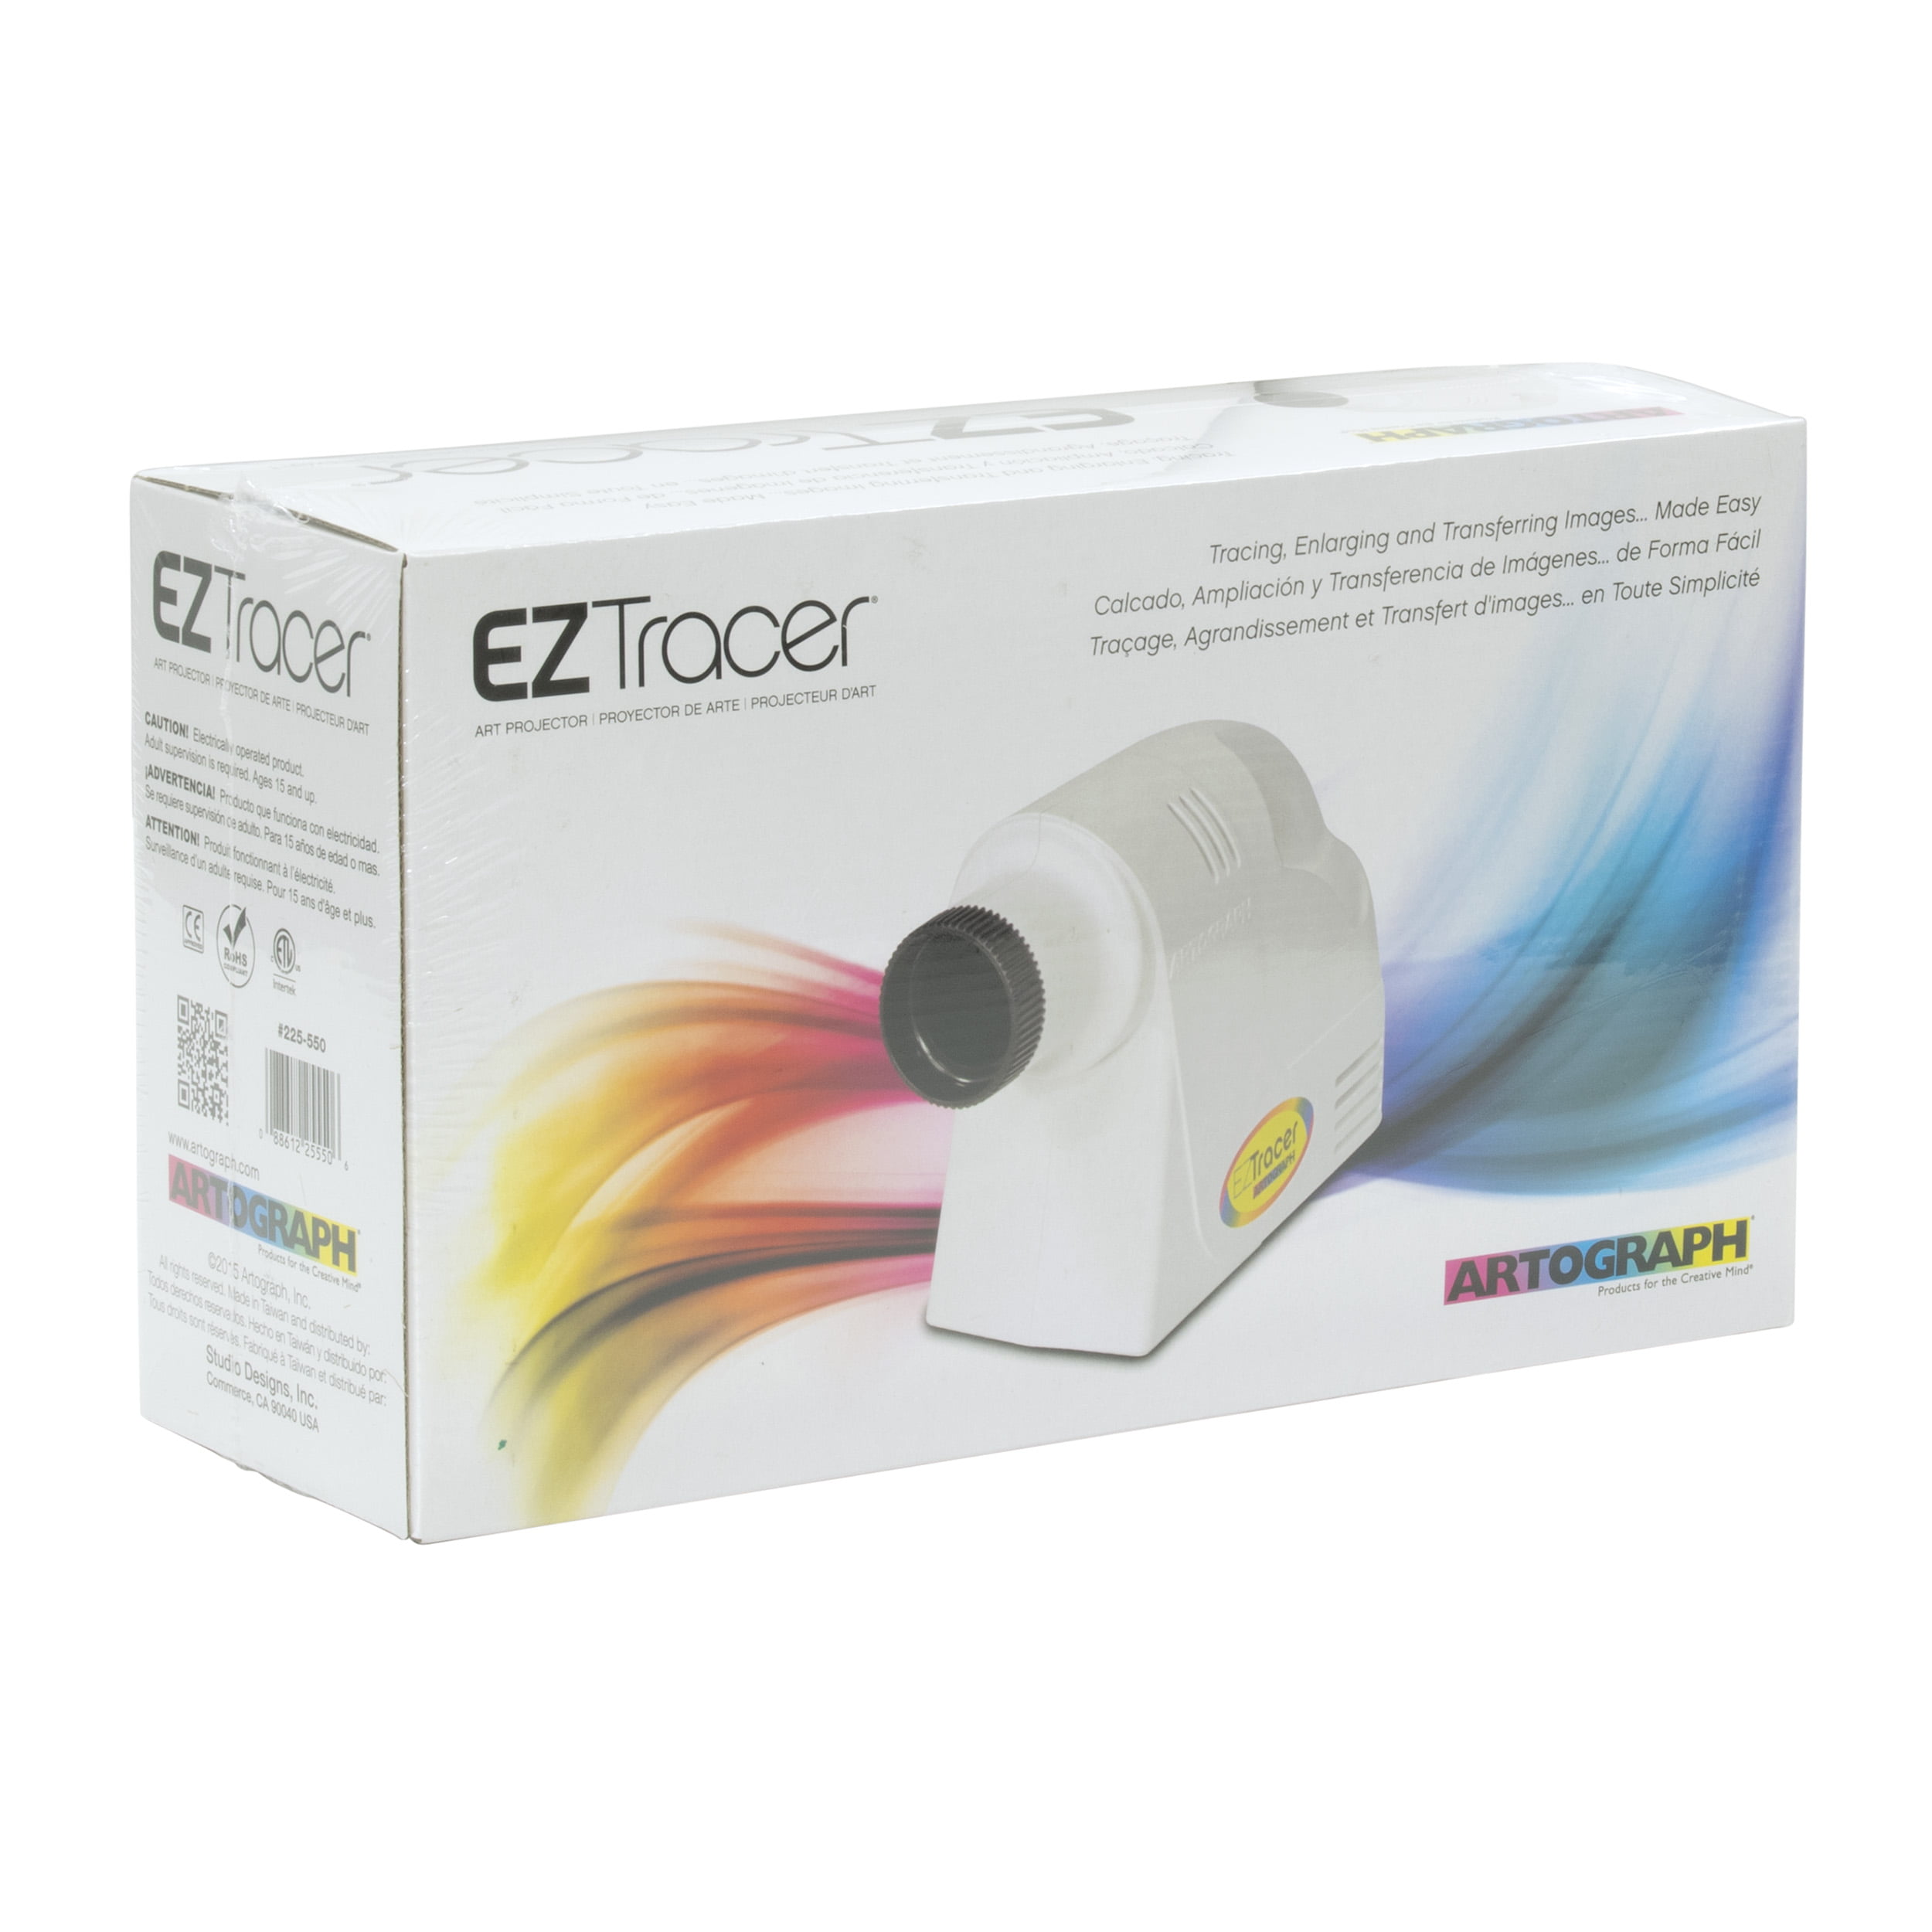 Guess whos back! The Artograph EZ tracer is a must have for artists 🎨, Projector